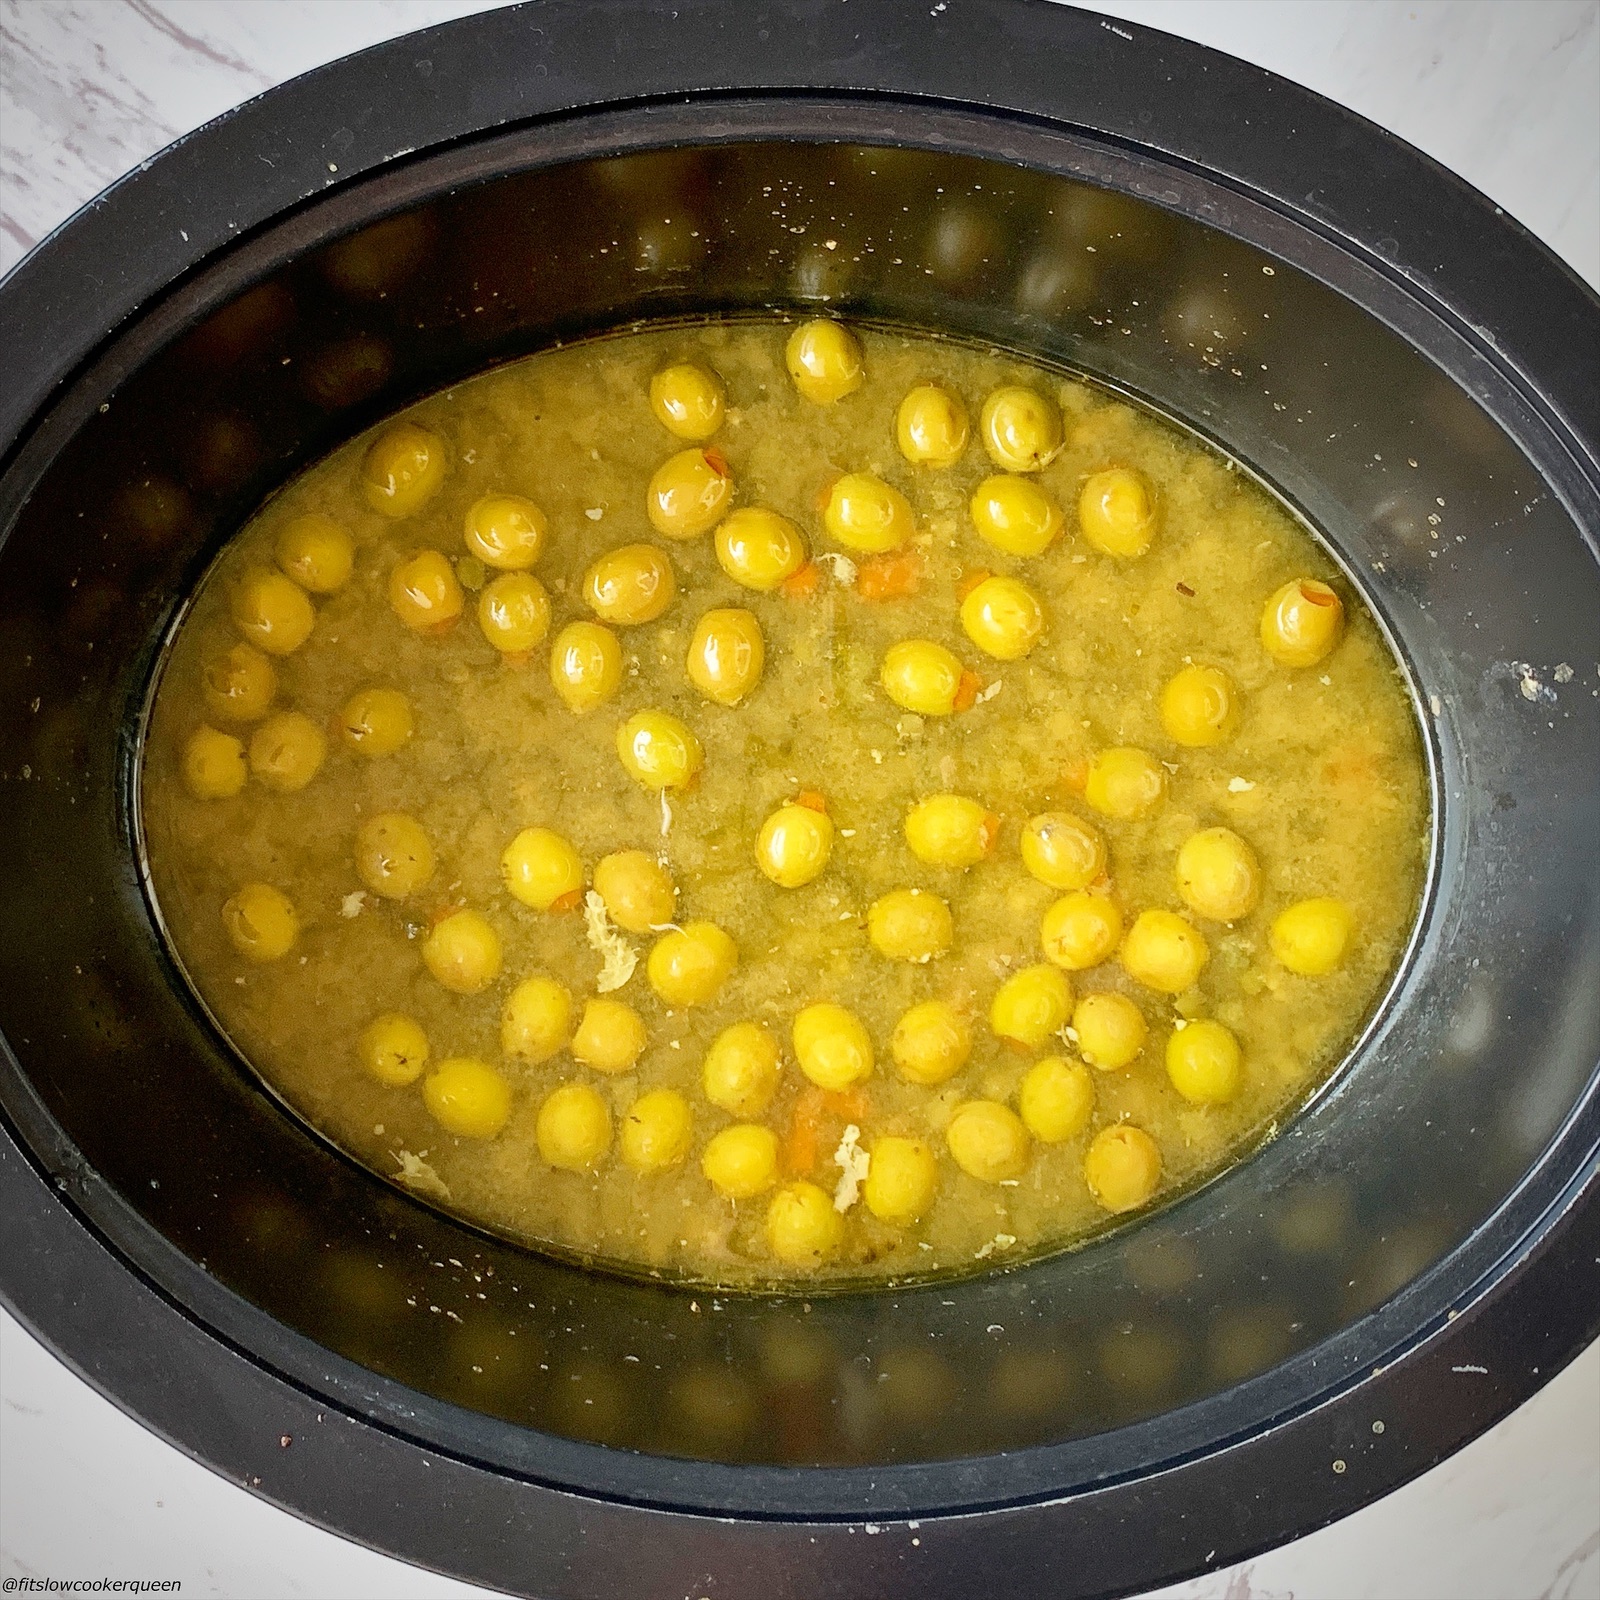 olives, capers and sauce in the slow cooker with chicken removed